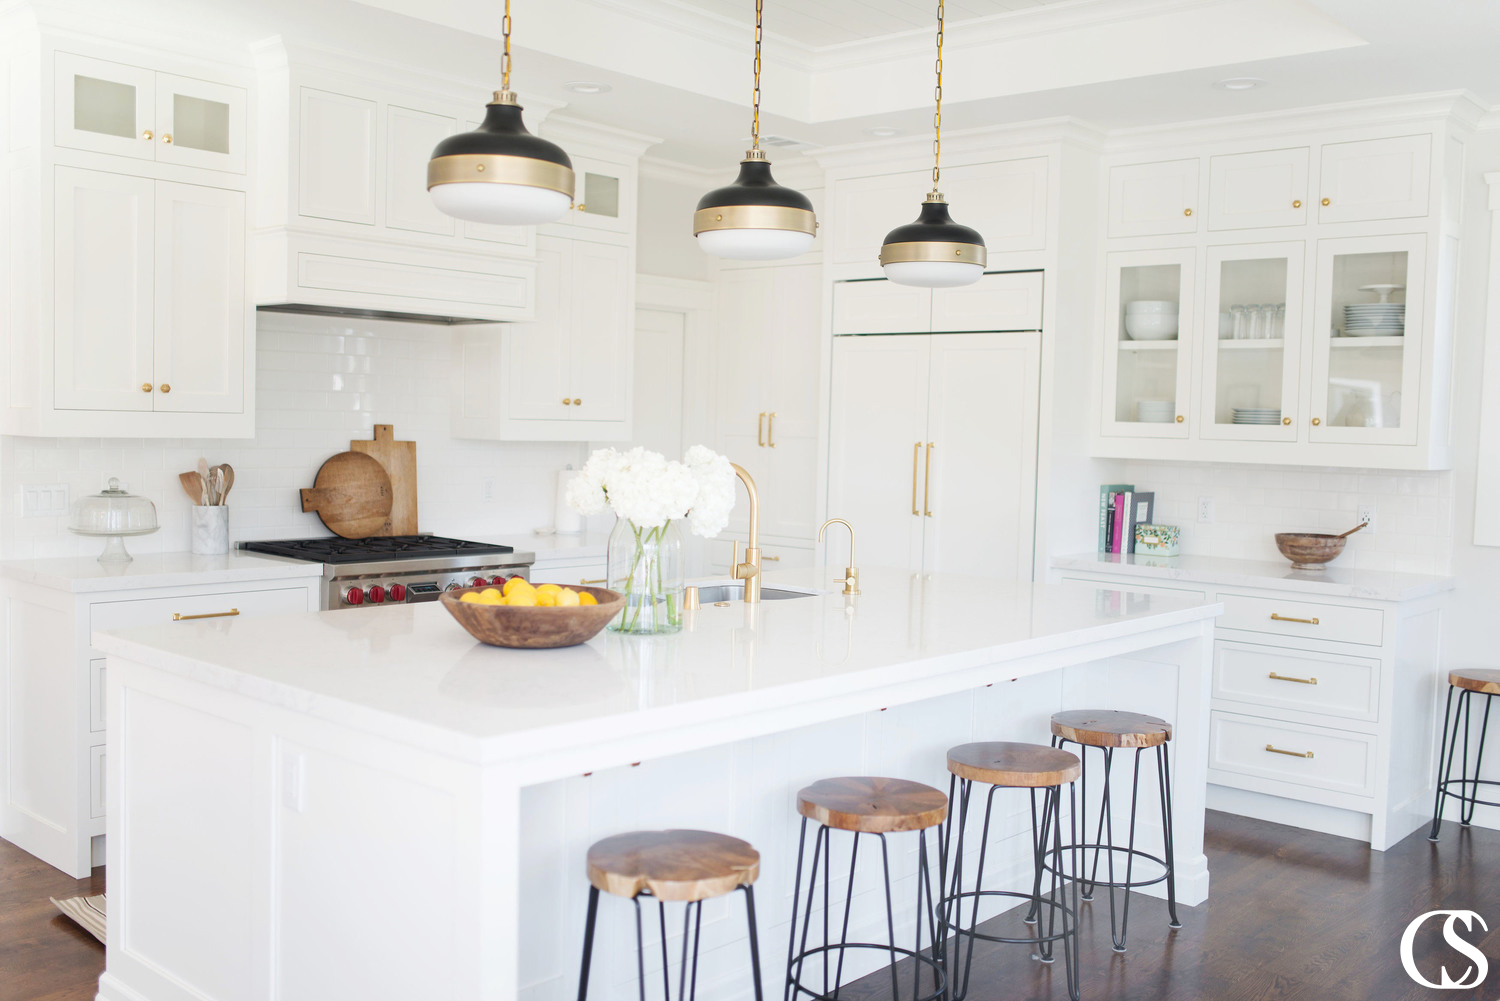 What does the best custom kitchen island include for you? What purpose can yours serve? Is it there for storage? Extra workspace? Bonus seating? Good news—a well-designed island can accomplish all of the above, and more.